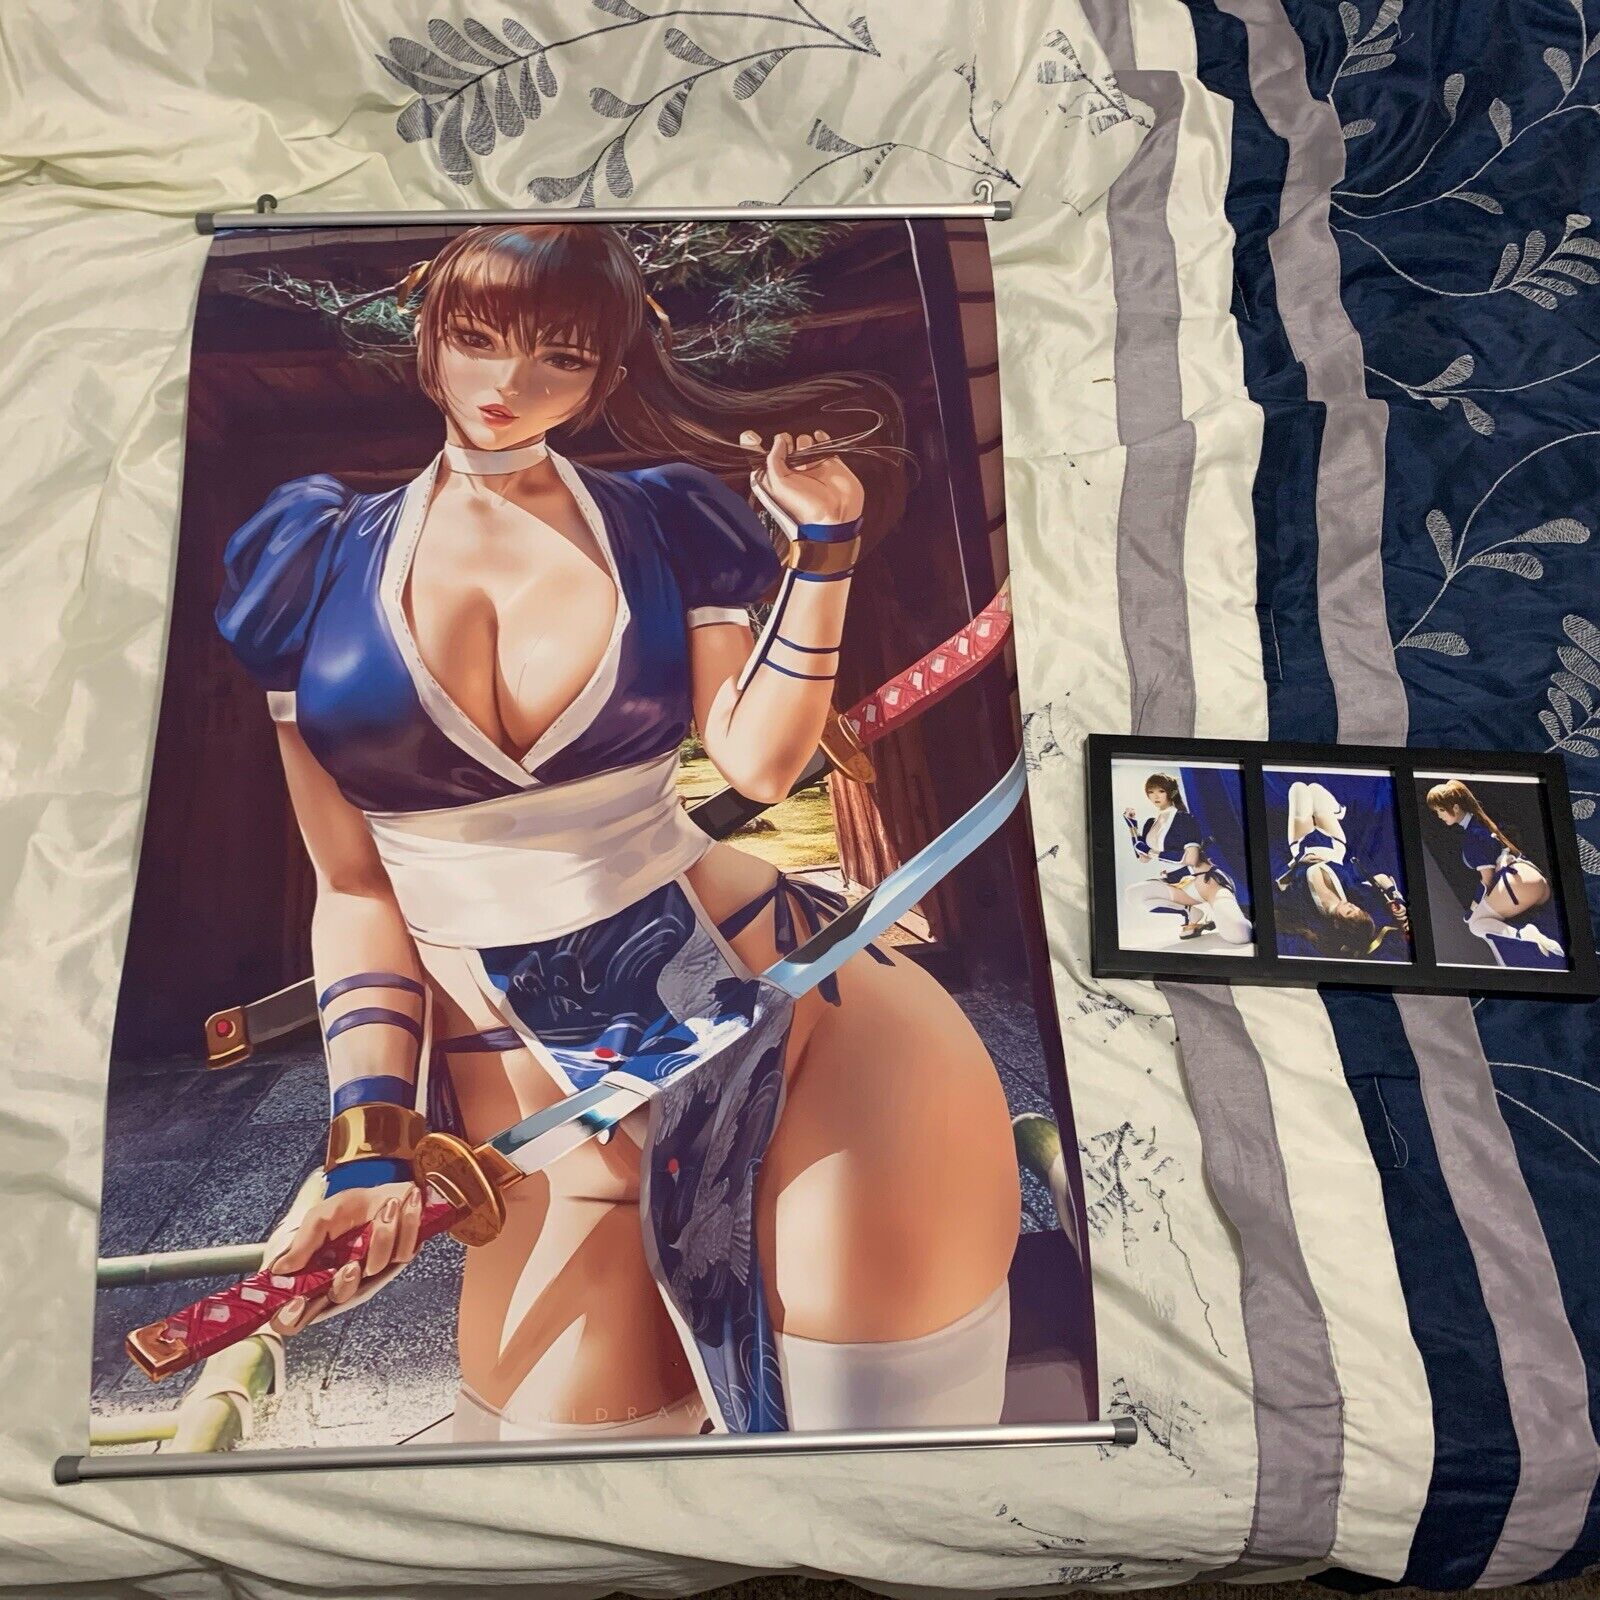 Dead or Alive Kasumi Wall Scroll Poster 60*90CM + Extras And More,